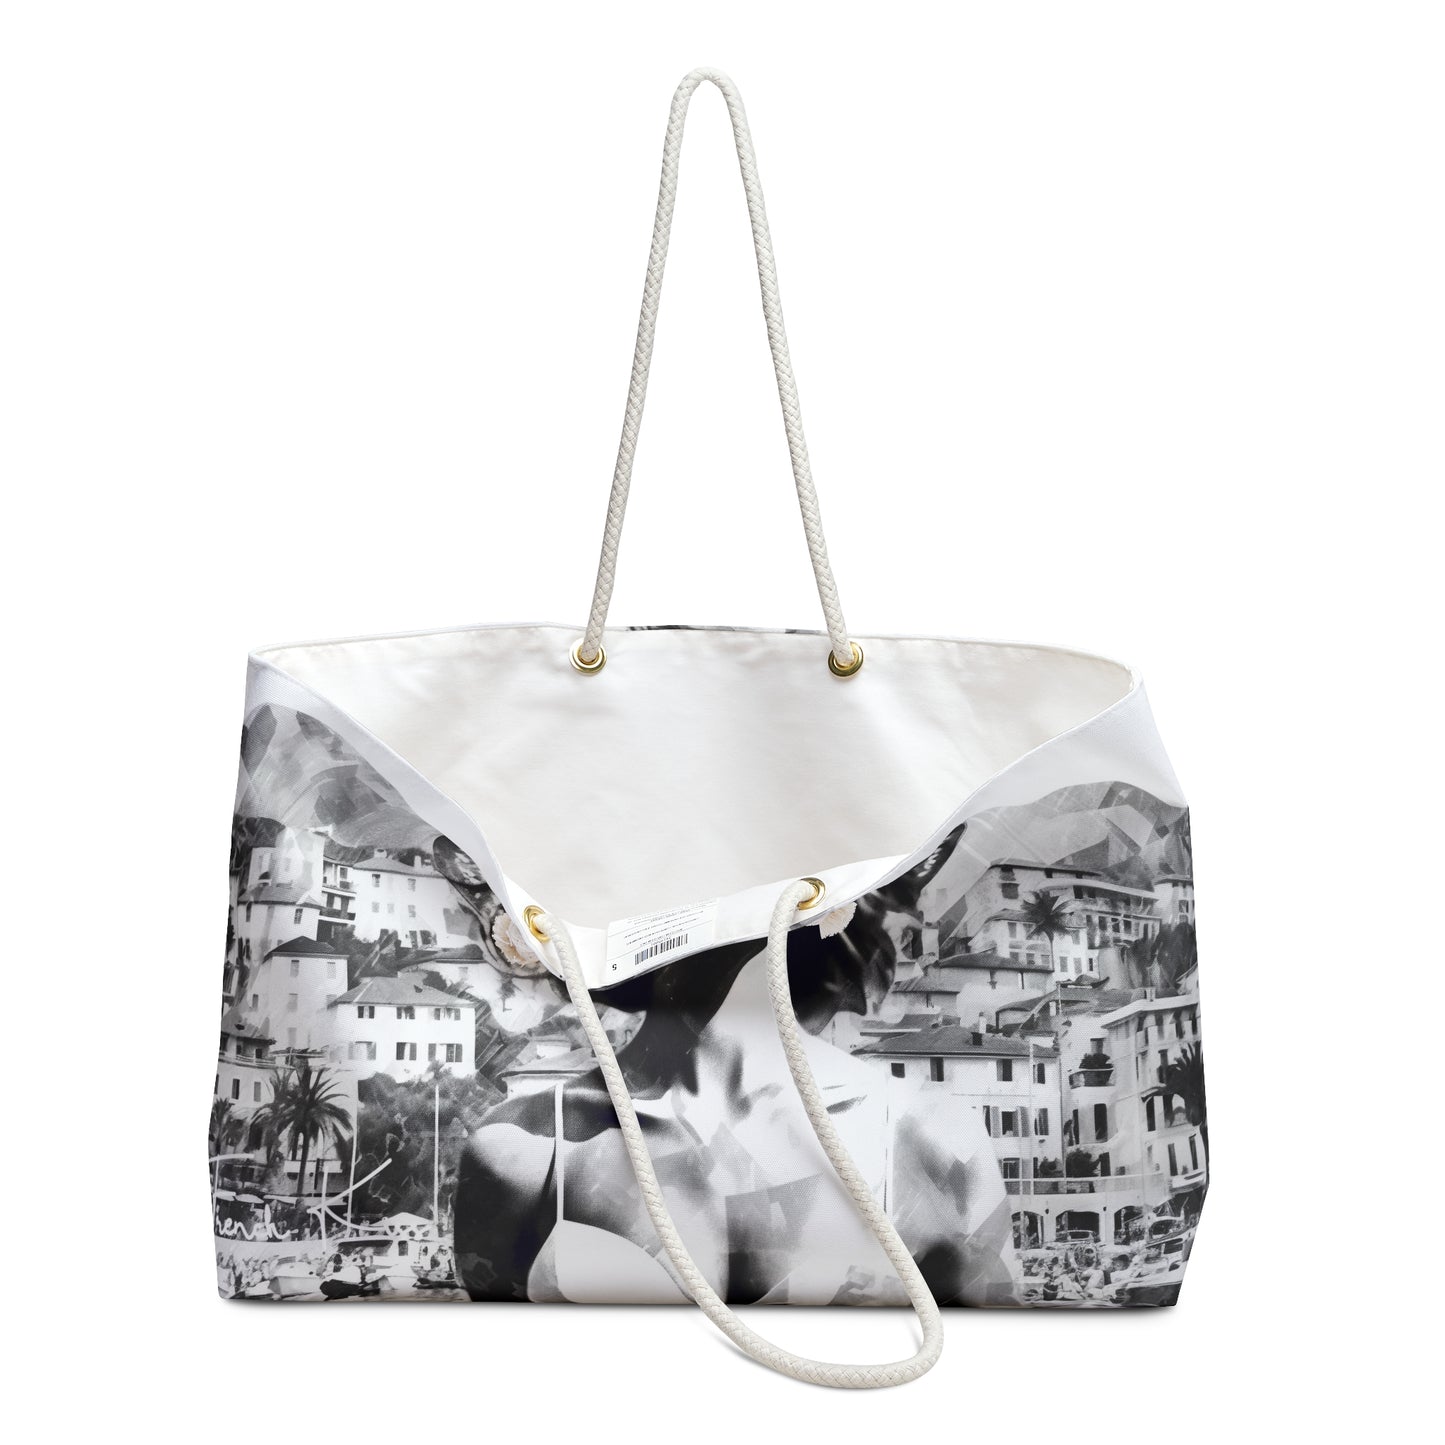 ANTIBES Sassy Sexy Chic Weekender Accessory Bag French Kiss Pop Art, Classy, Couture, Travel, Fashion, Beauty gift item